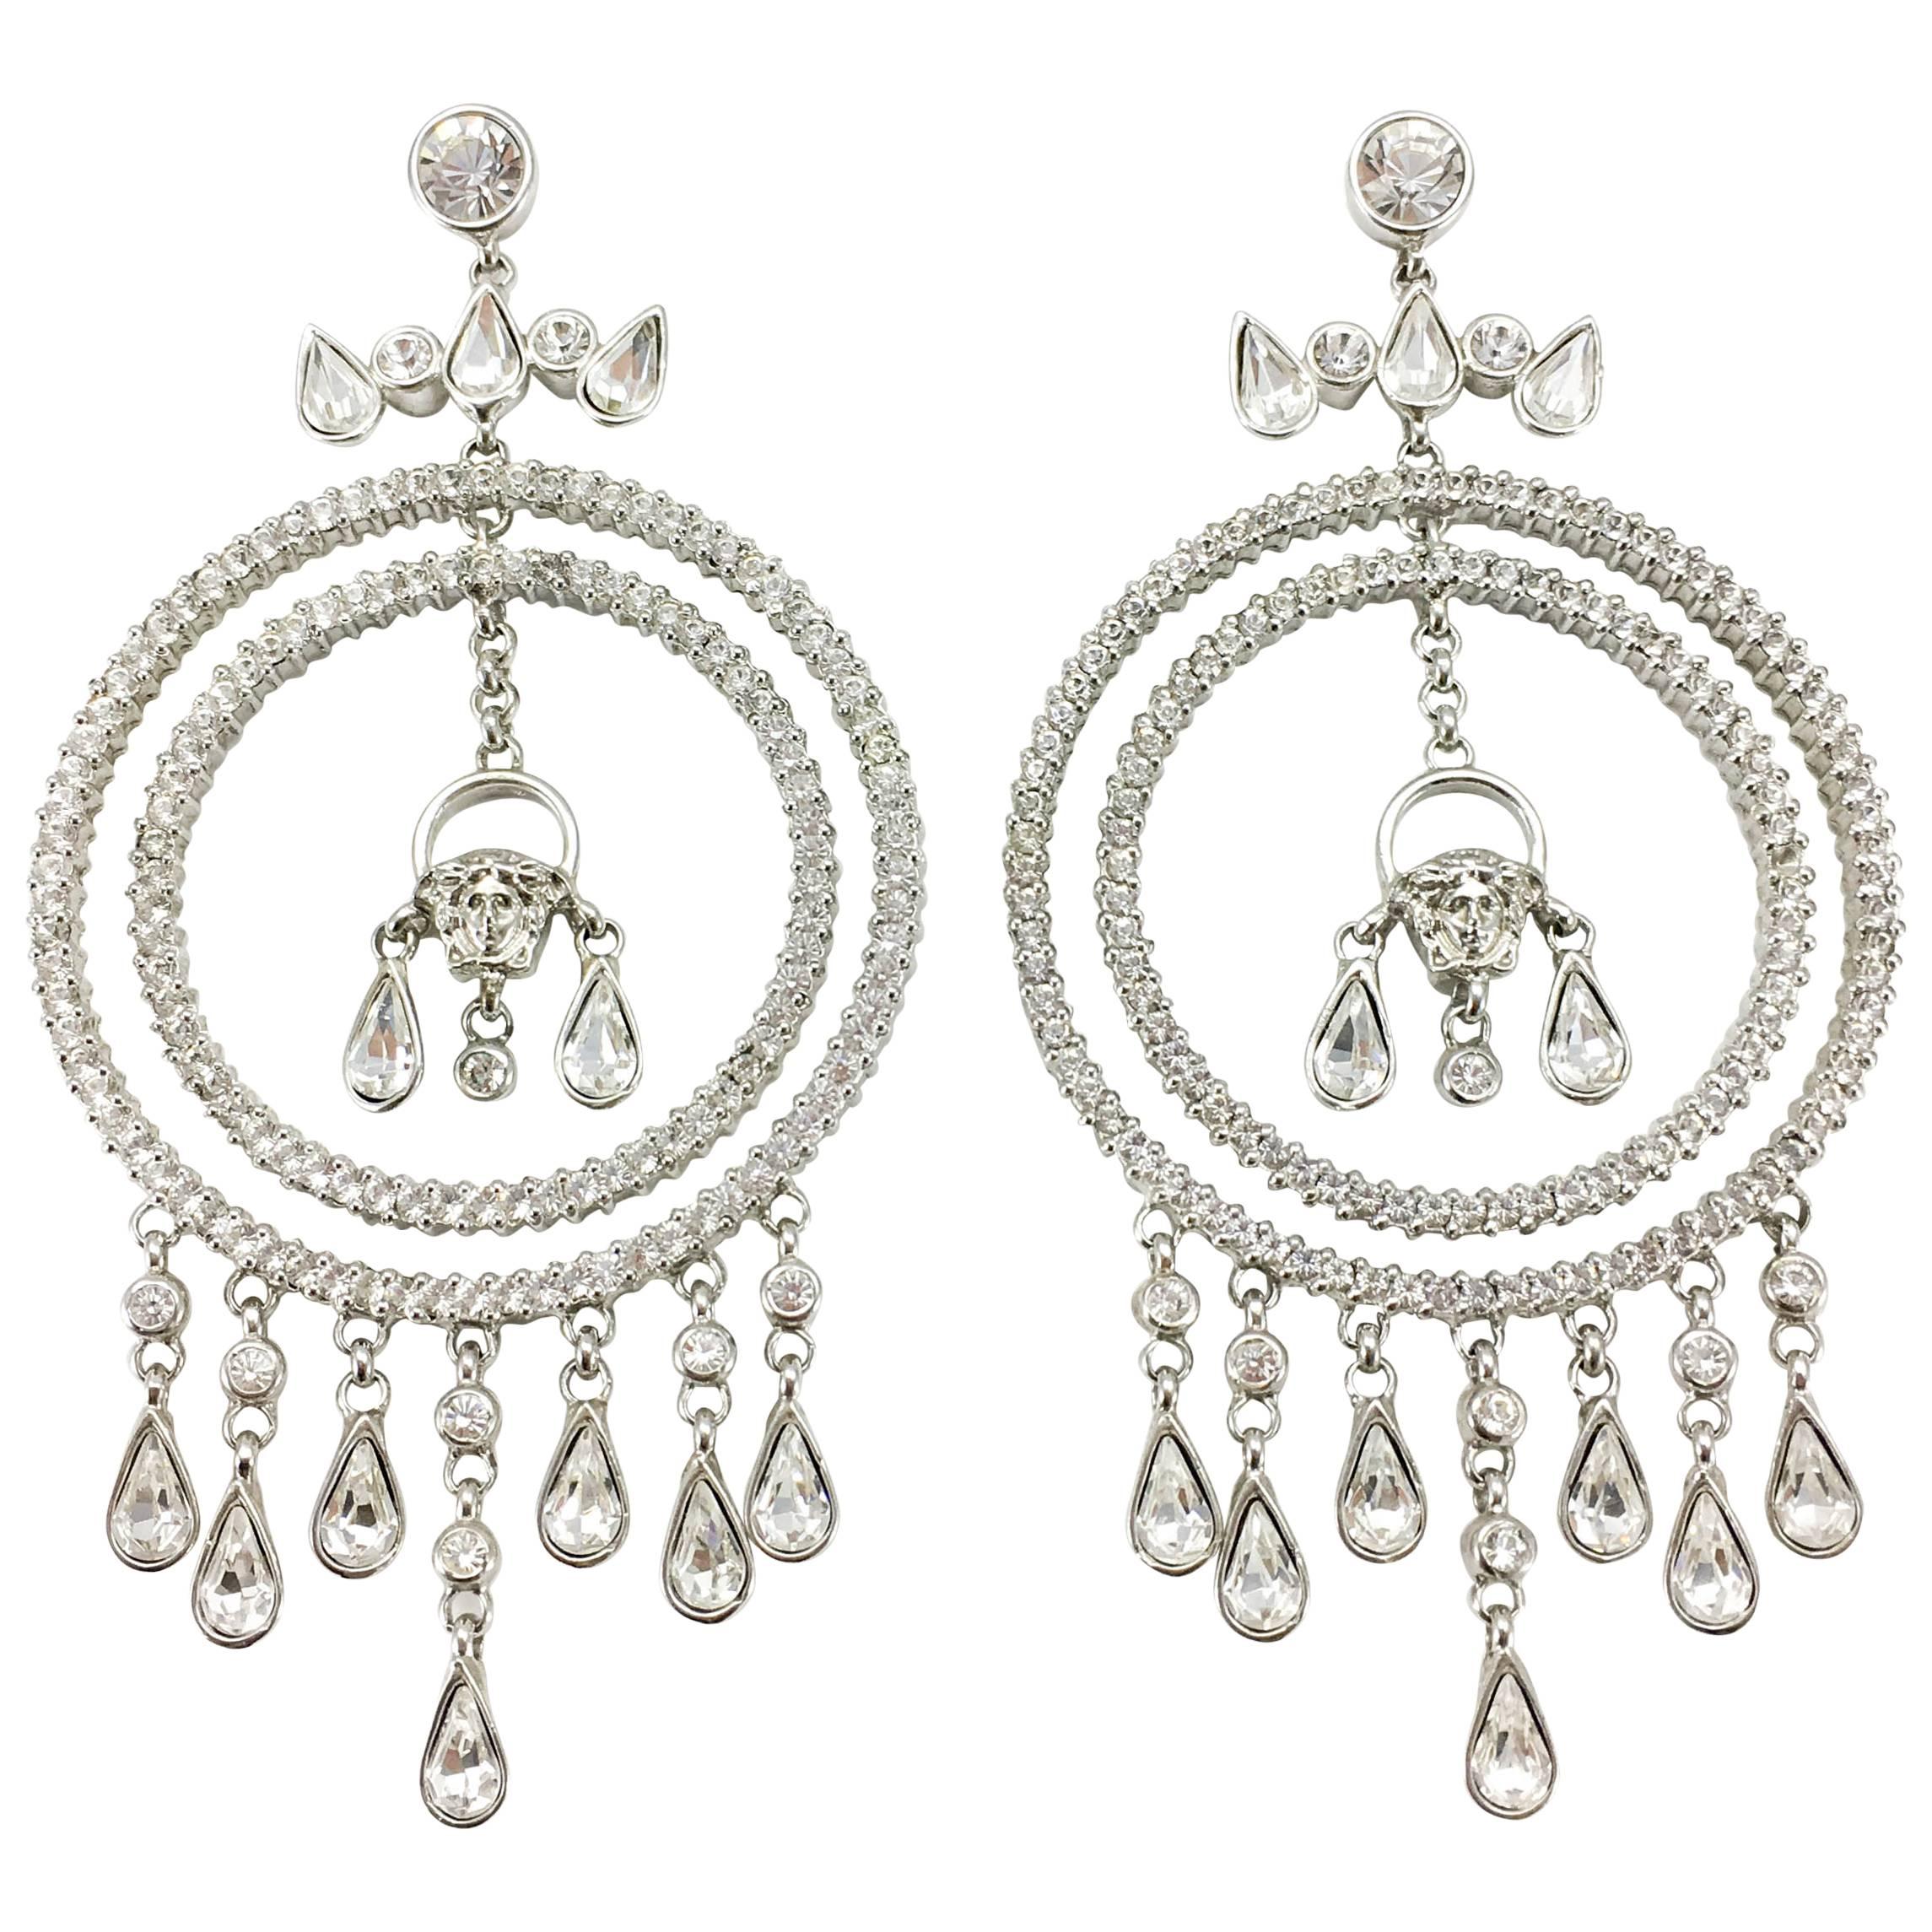 Versace Crystal Embellished Chandelier Earrings with the 'Medusa's Head' For Sale